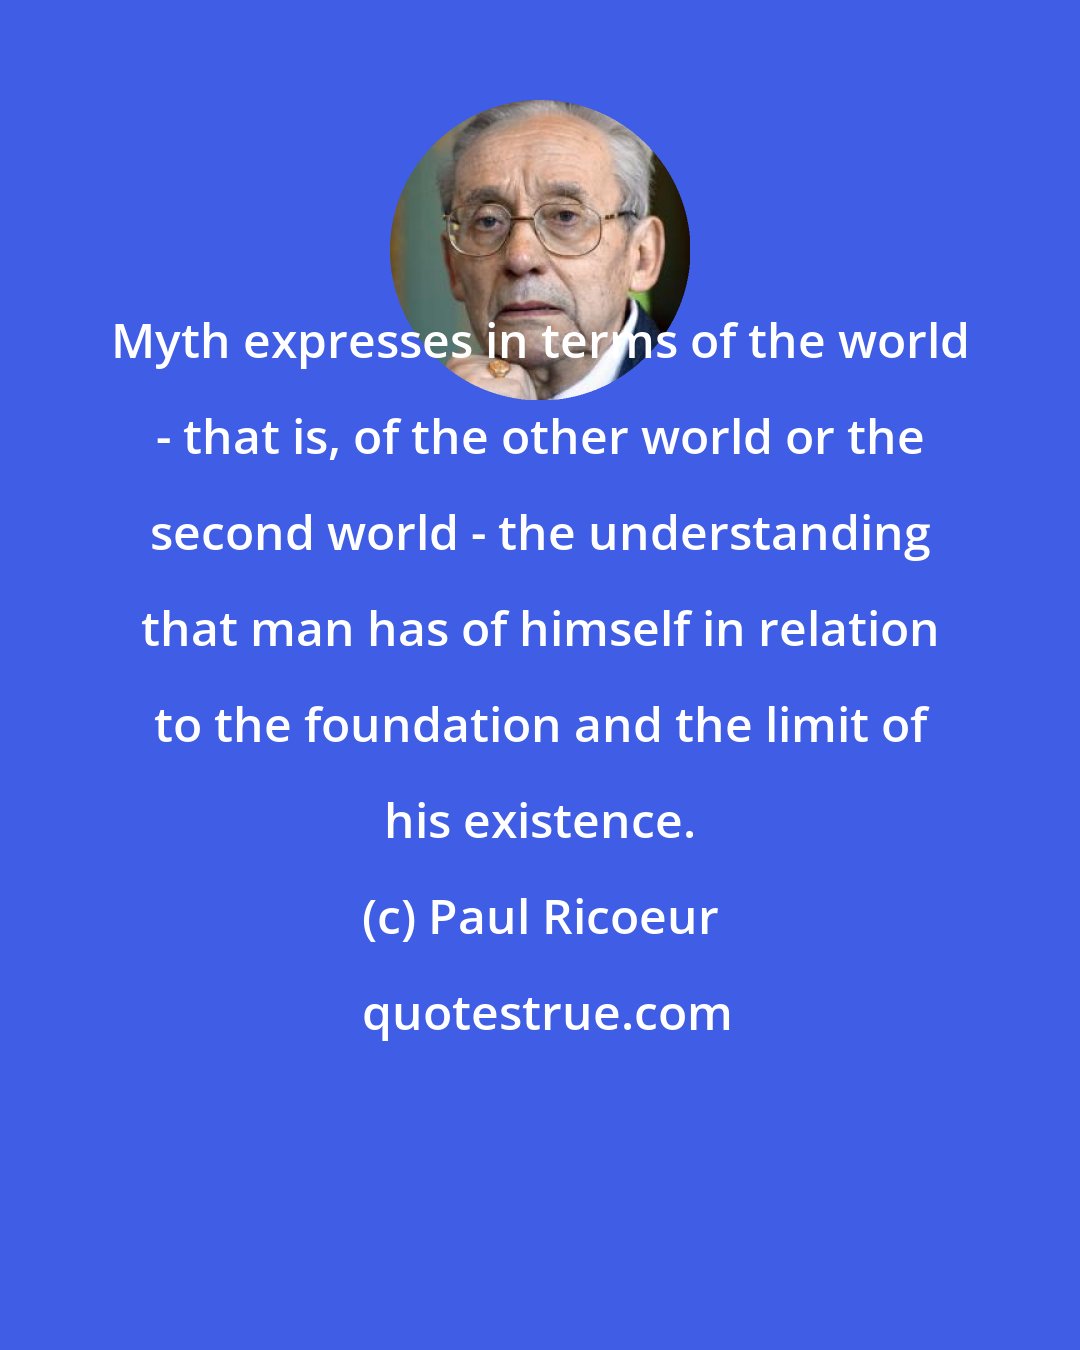 Paul Ricoeur: Myth expresses in terms of the world - that is, of the other world or the second world - the understanding that man has of himself in relation to the foundation and the limit of his existence.